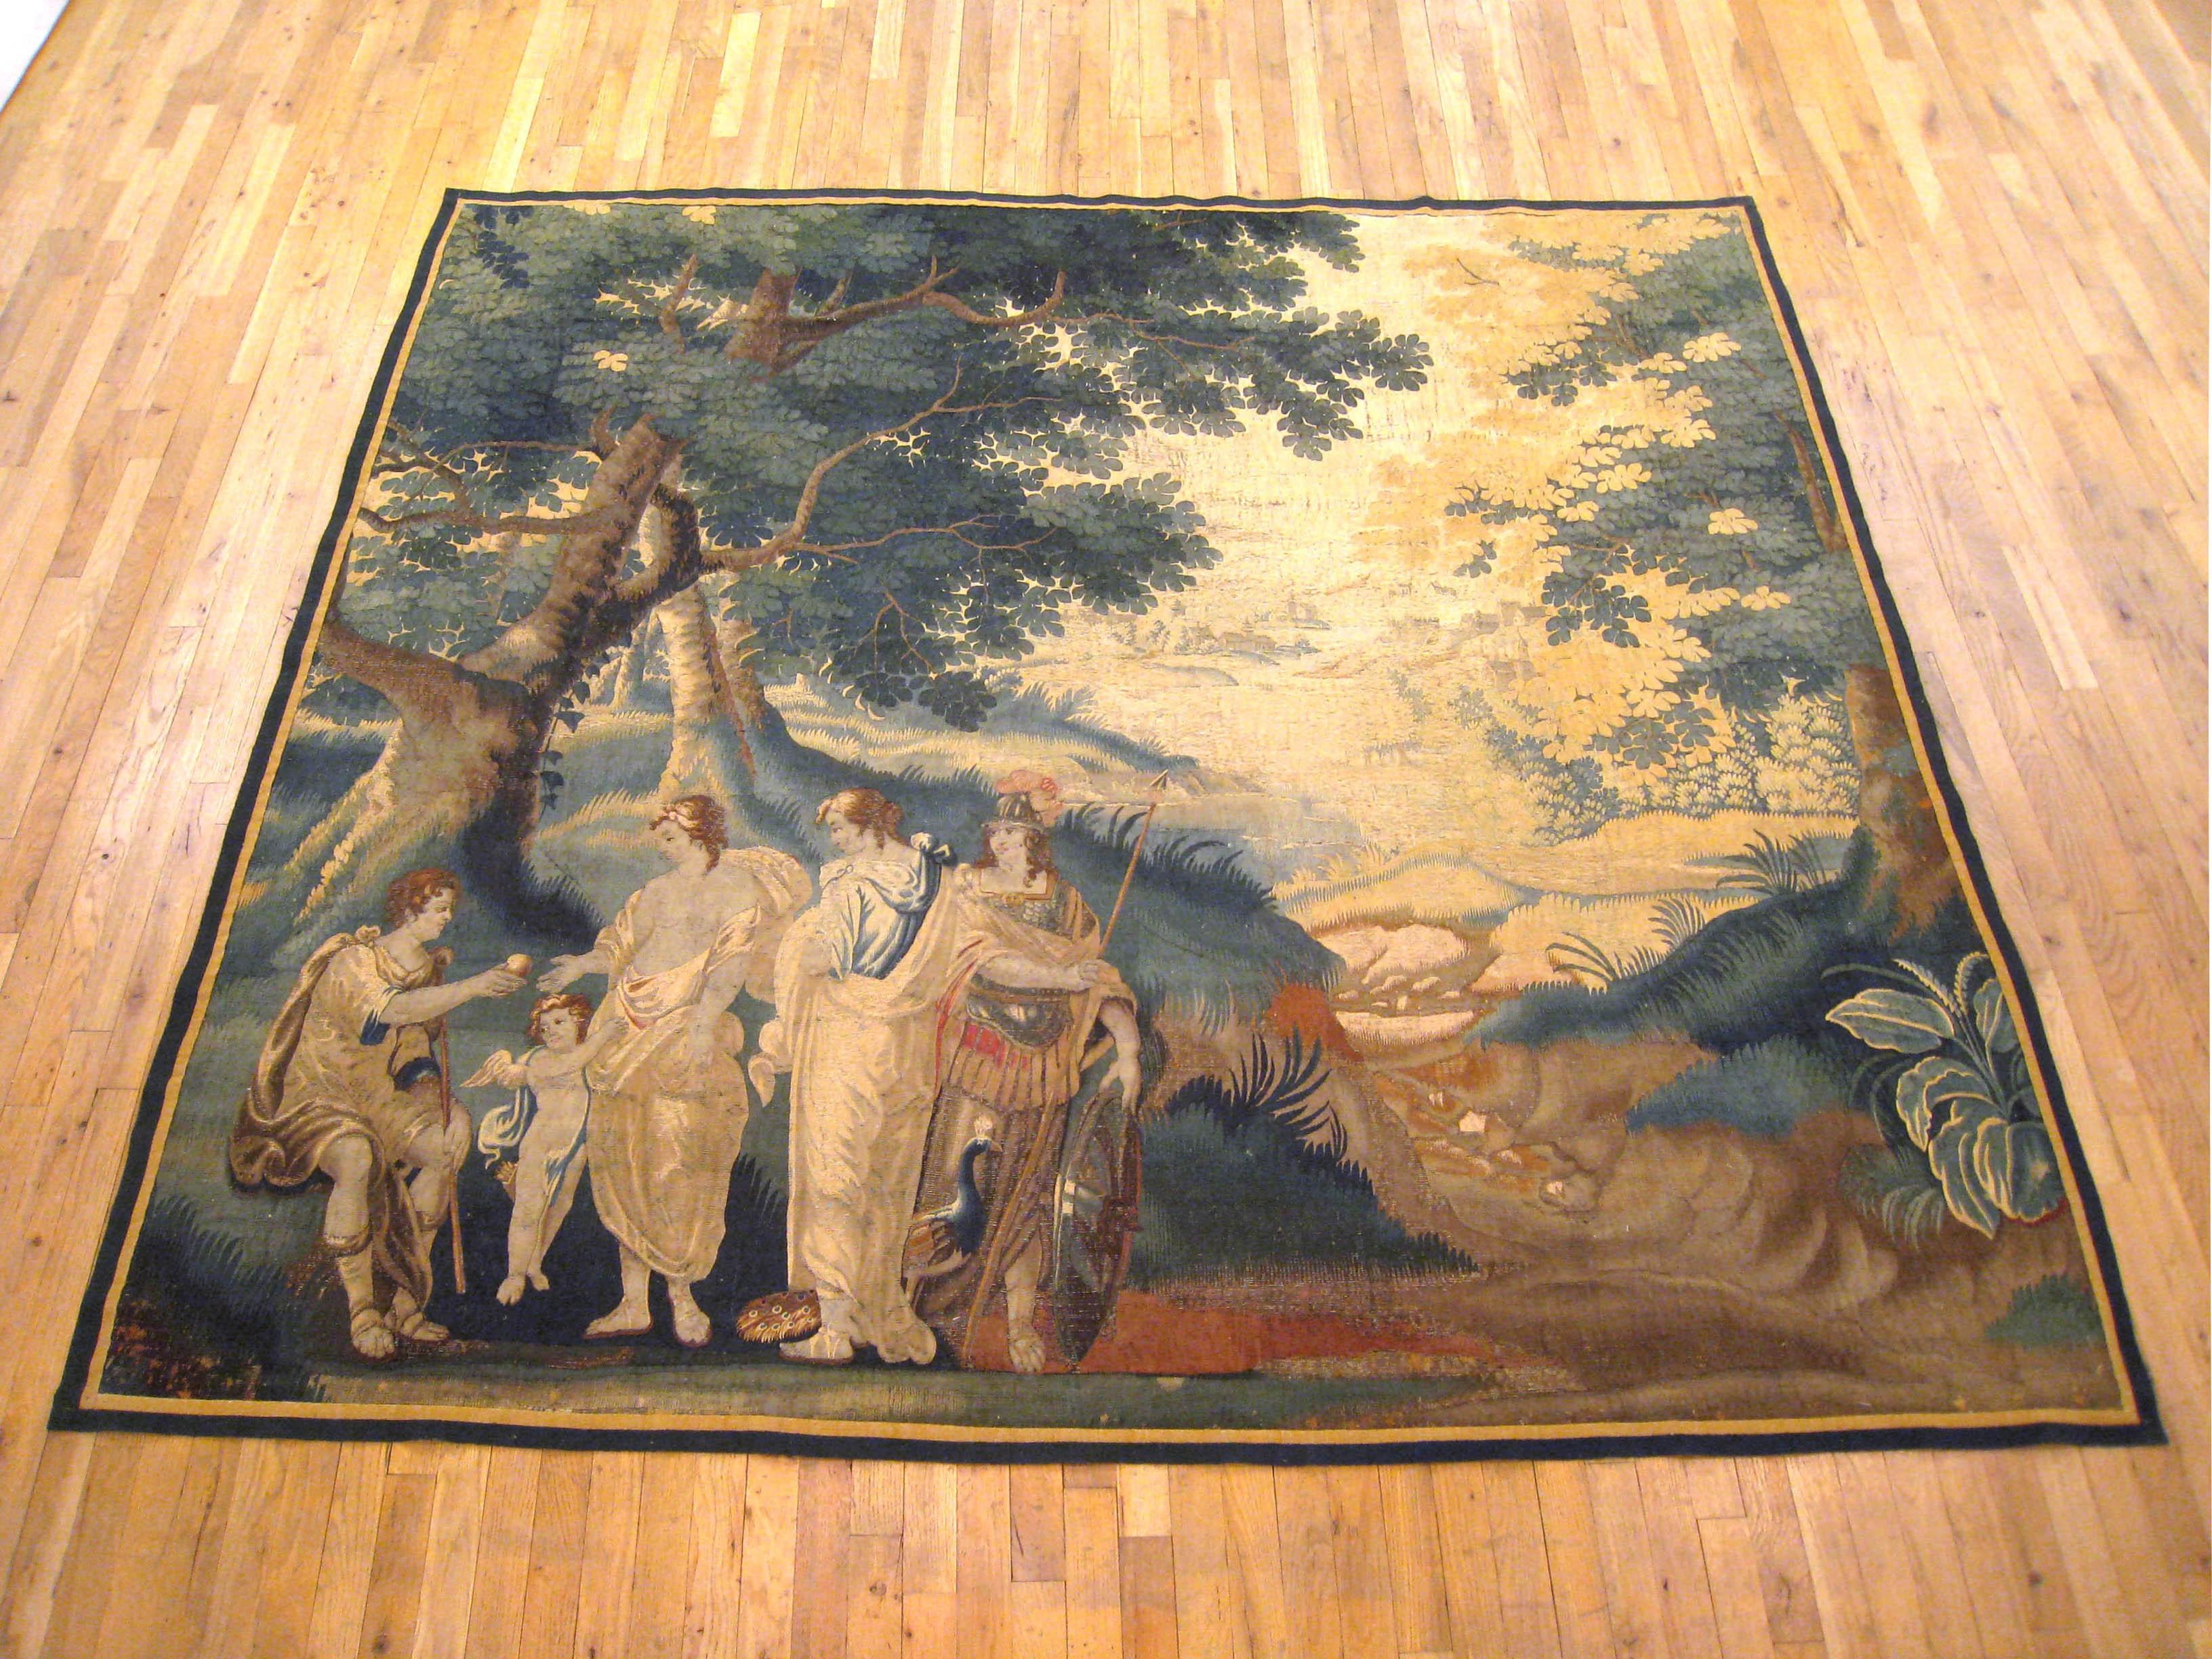 A French Aubusson mythological tapestry from the late 17th century, depicting the Judgment of Paris. In this famous scene, the handsome young man, Paris, seated at left, is chosen by the powerful deity, Zeus, to determine which of the three female